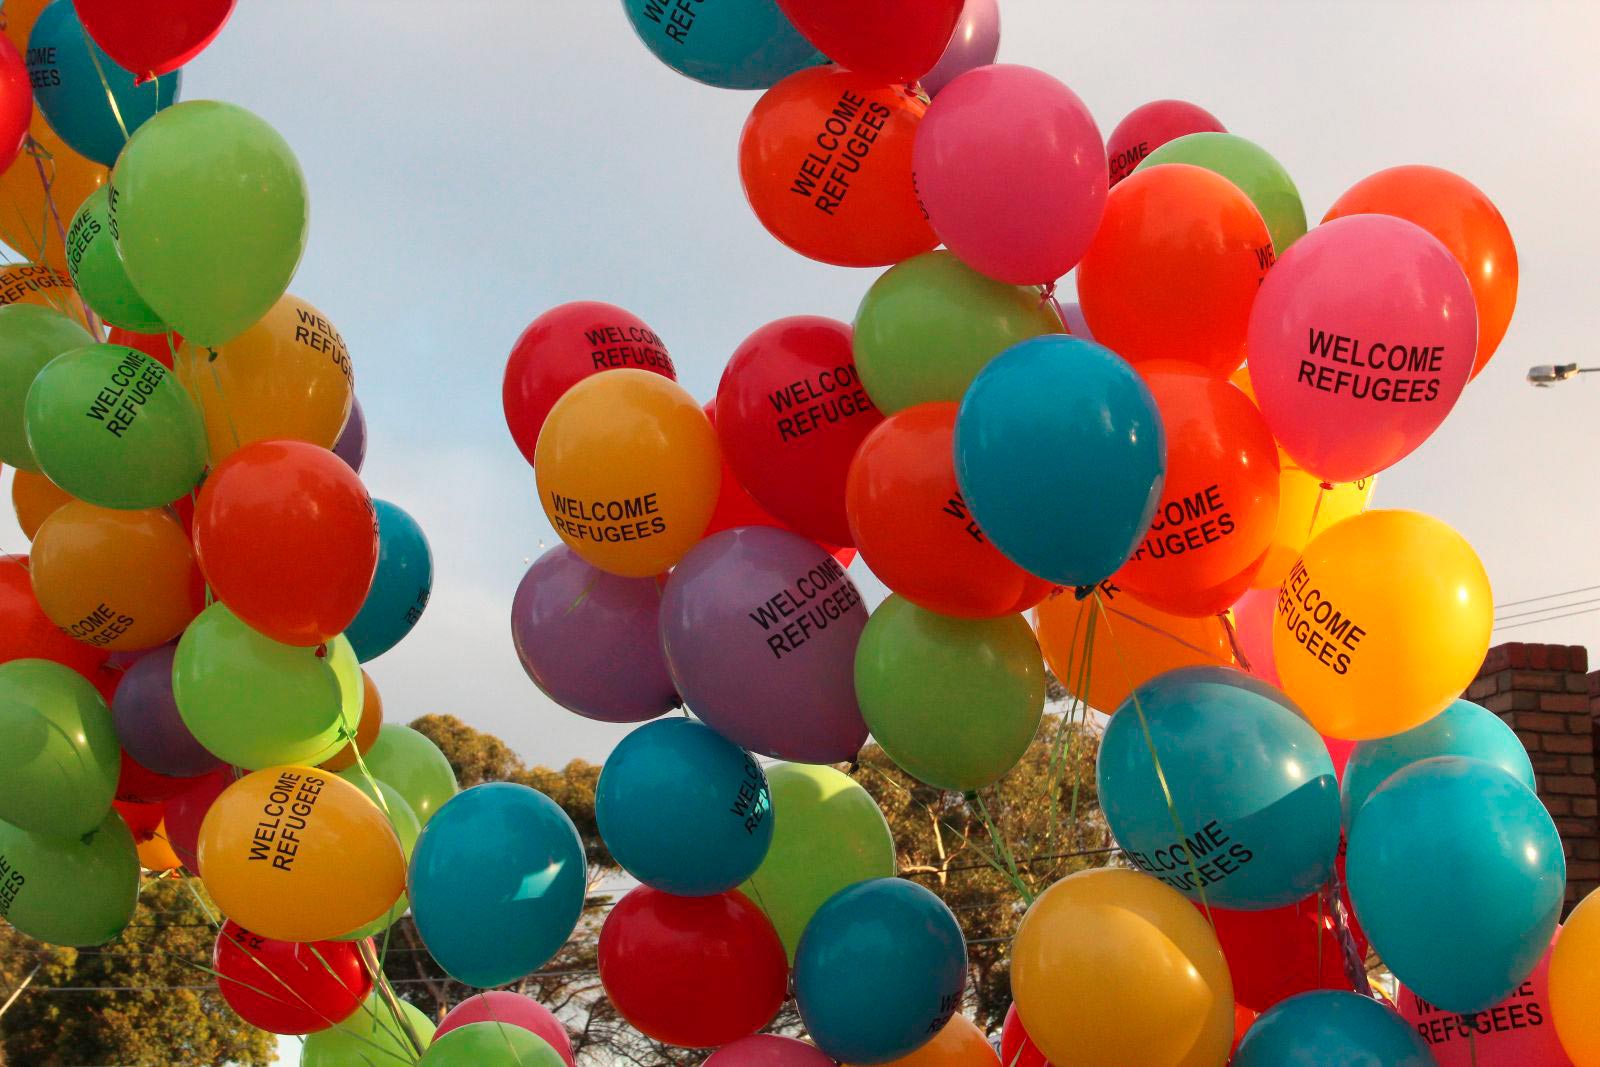 Balloons printed with a message of support for refugees.